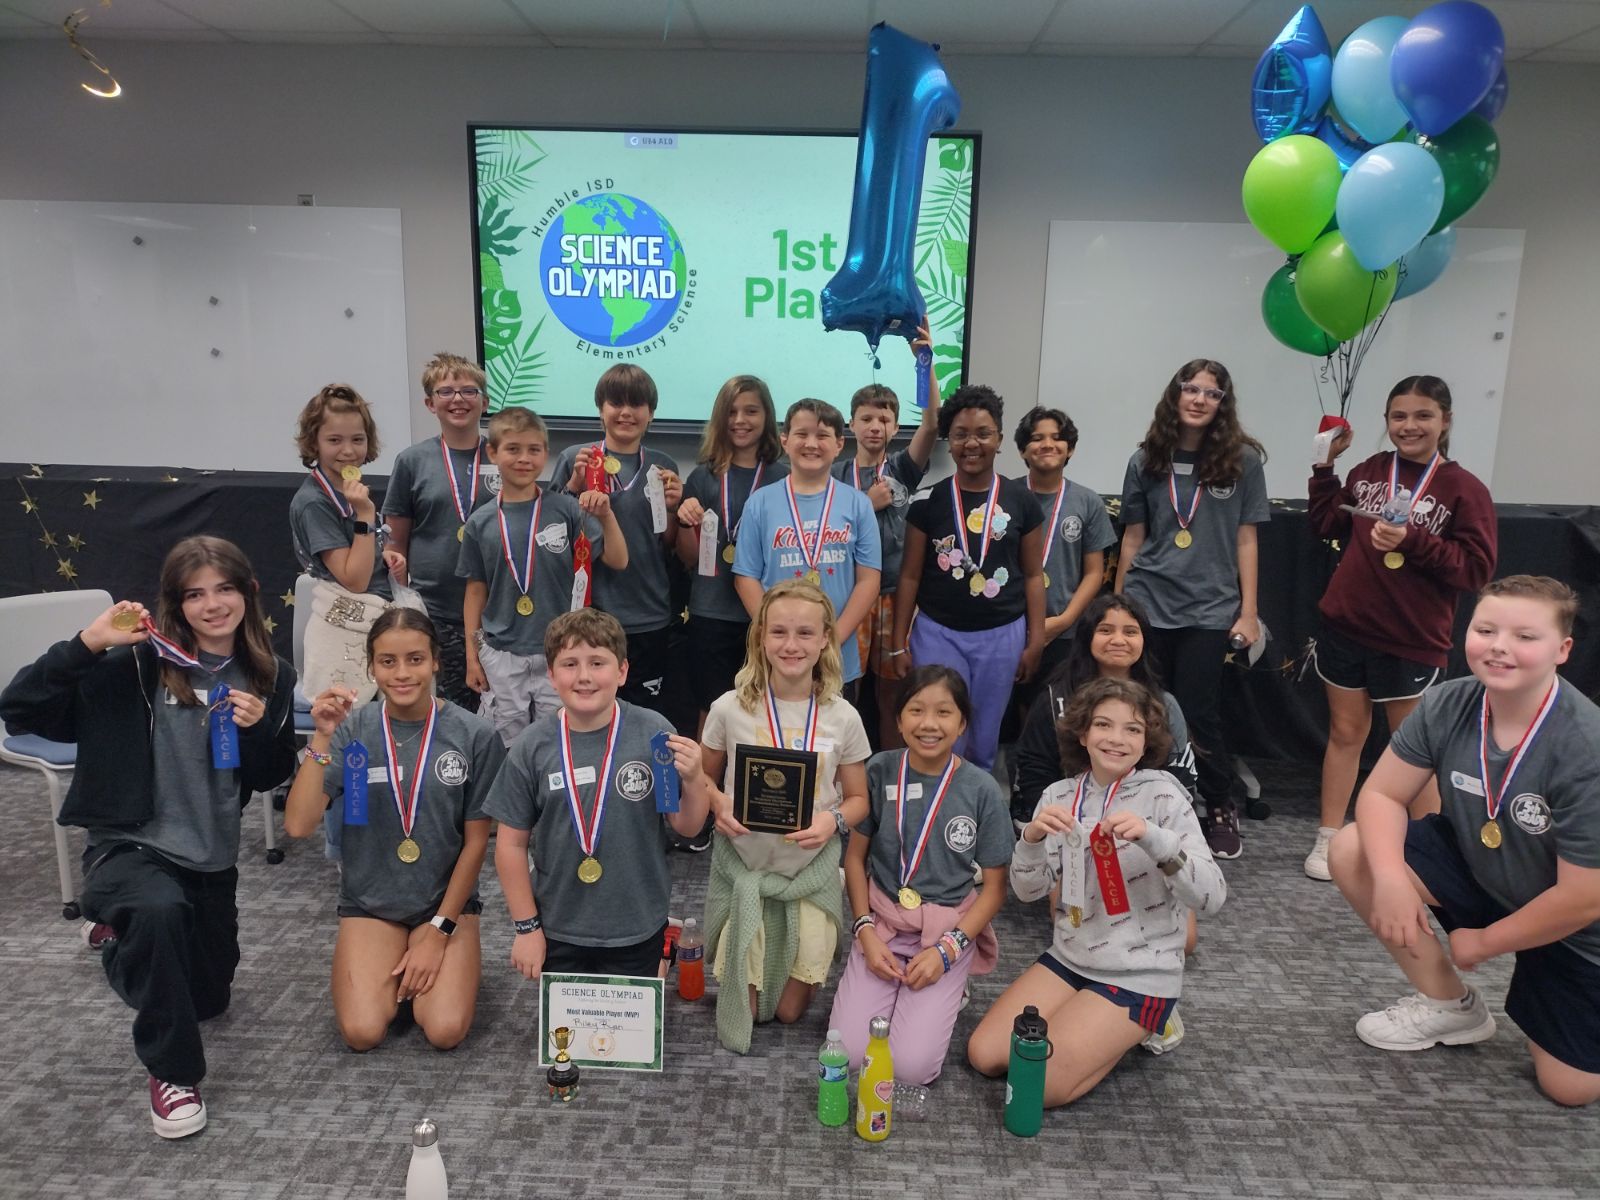 HHE Science Olympiad Win 1st Place in the Environmental Pathway